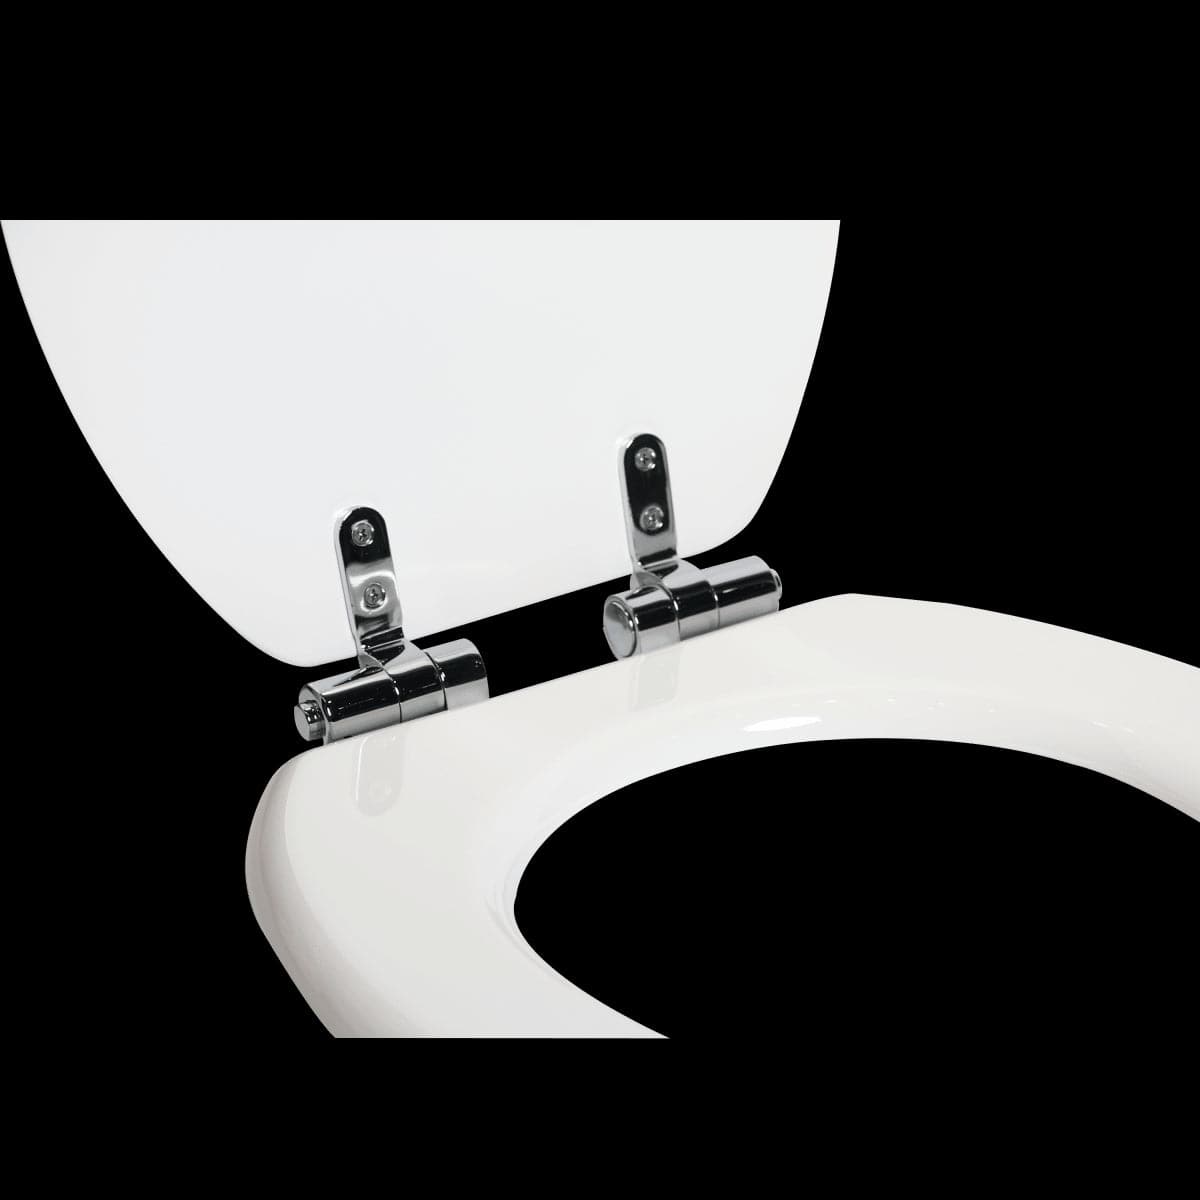 PURITY OVAL WHITE WC SEAT WITH SLOW CLOSING MECHANISM - best price from Maltashopper.com BR430007086